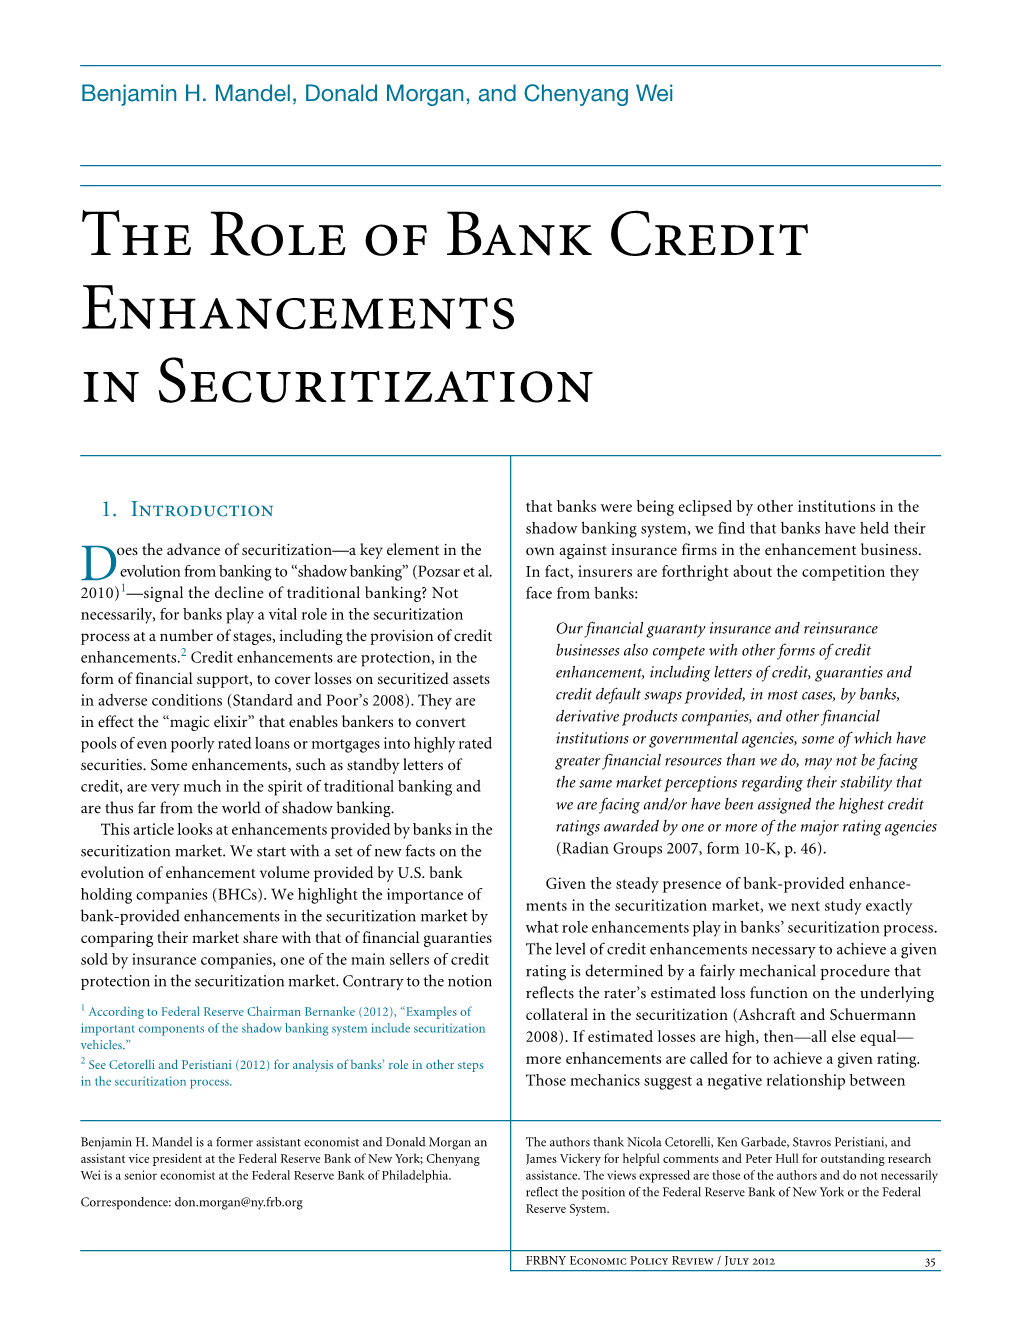 The Role of Bank Credit Enhancements in Securitization